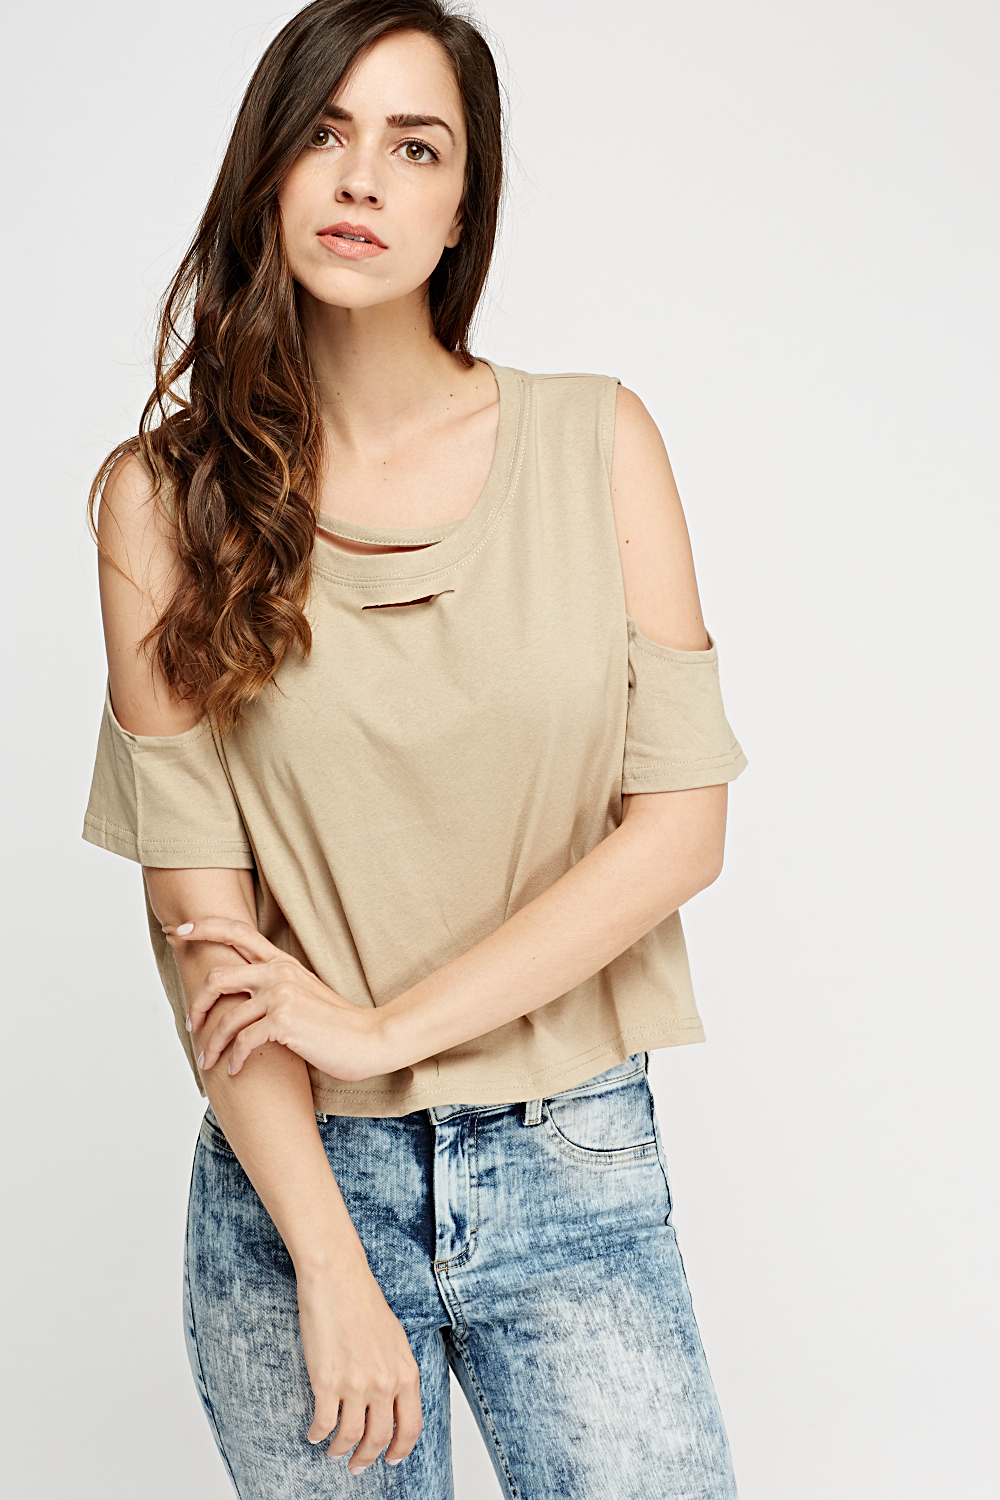 Distressed Front Cut Out Shoulder Top - Just $3